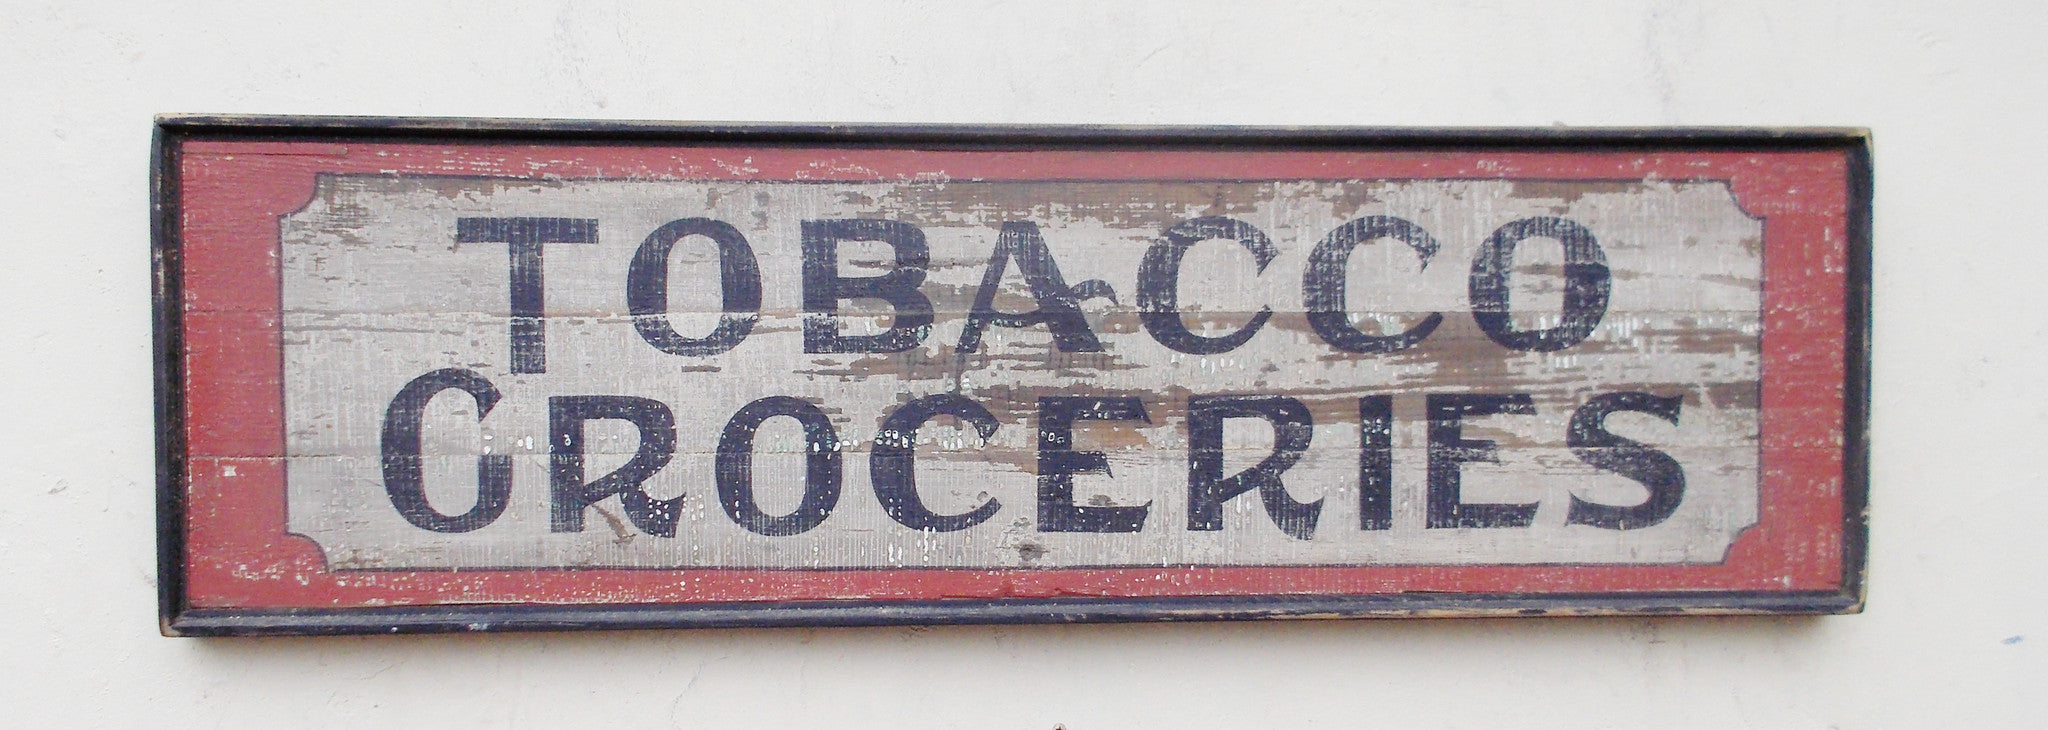 Tobacco and Groceries